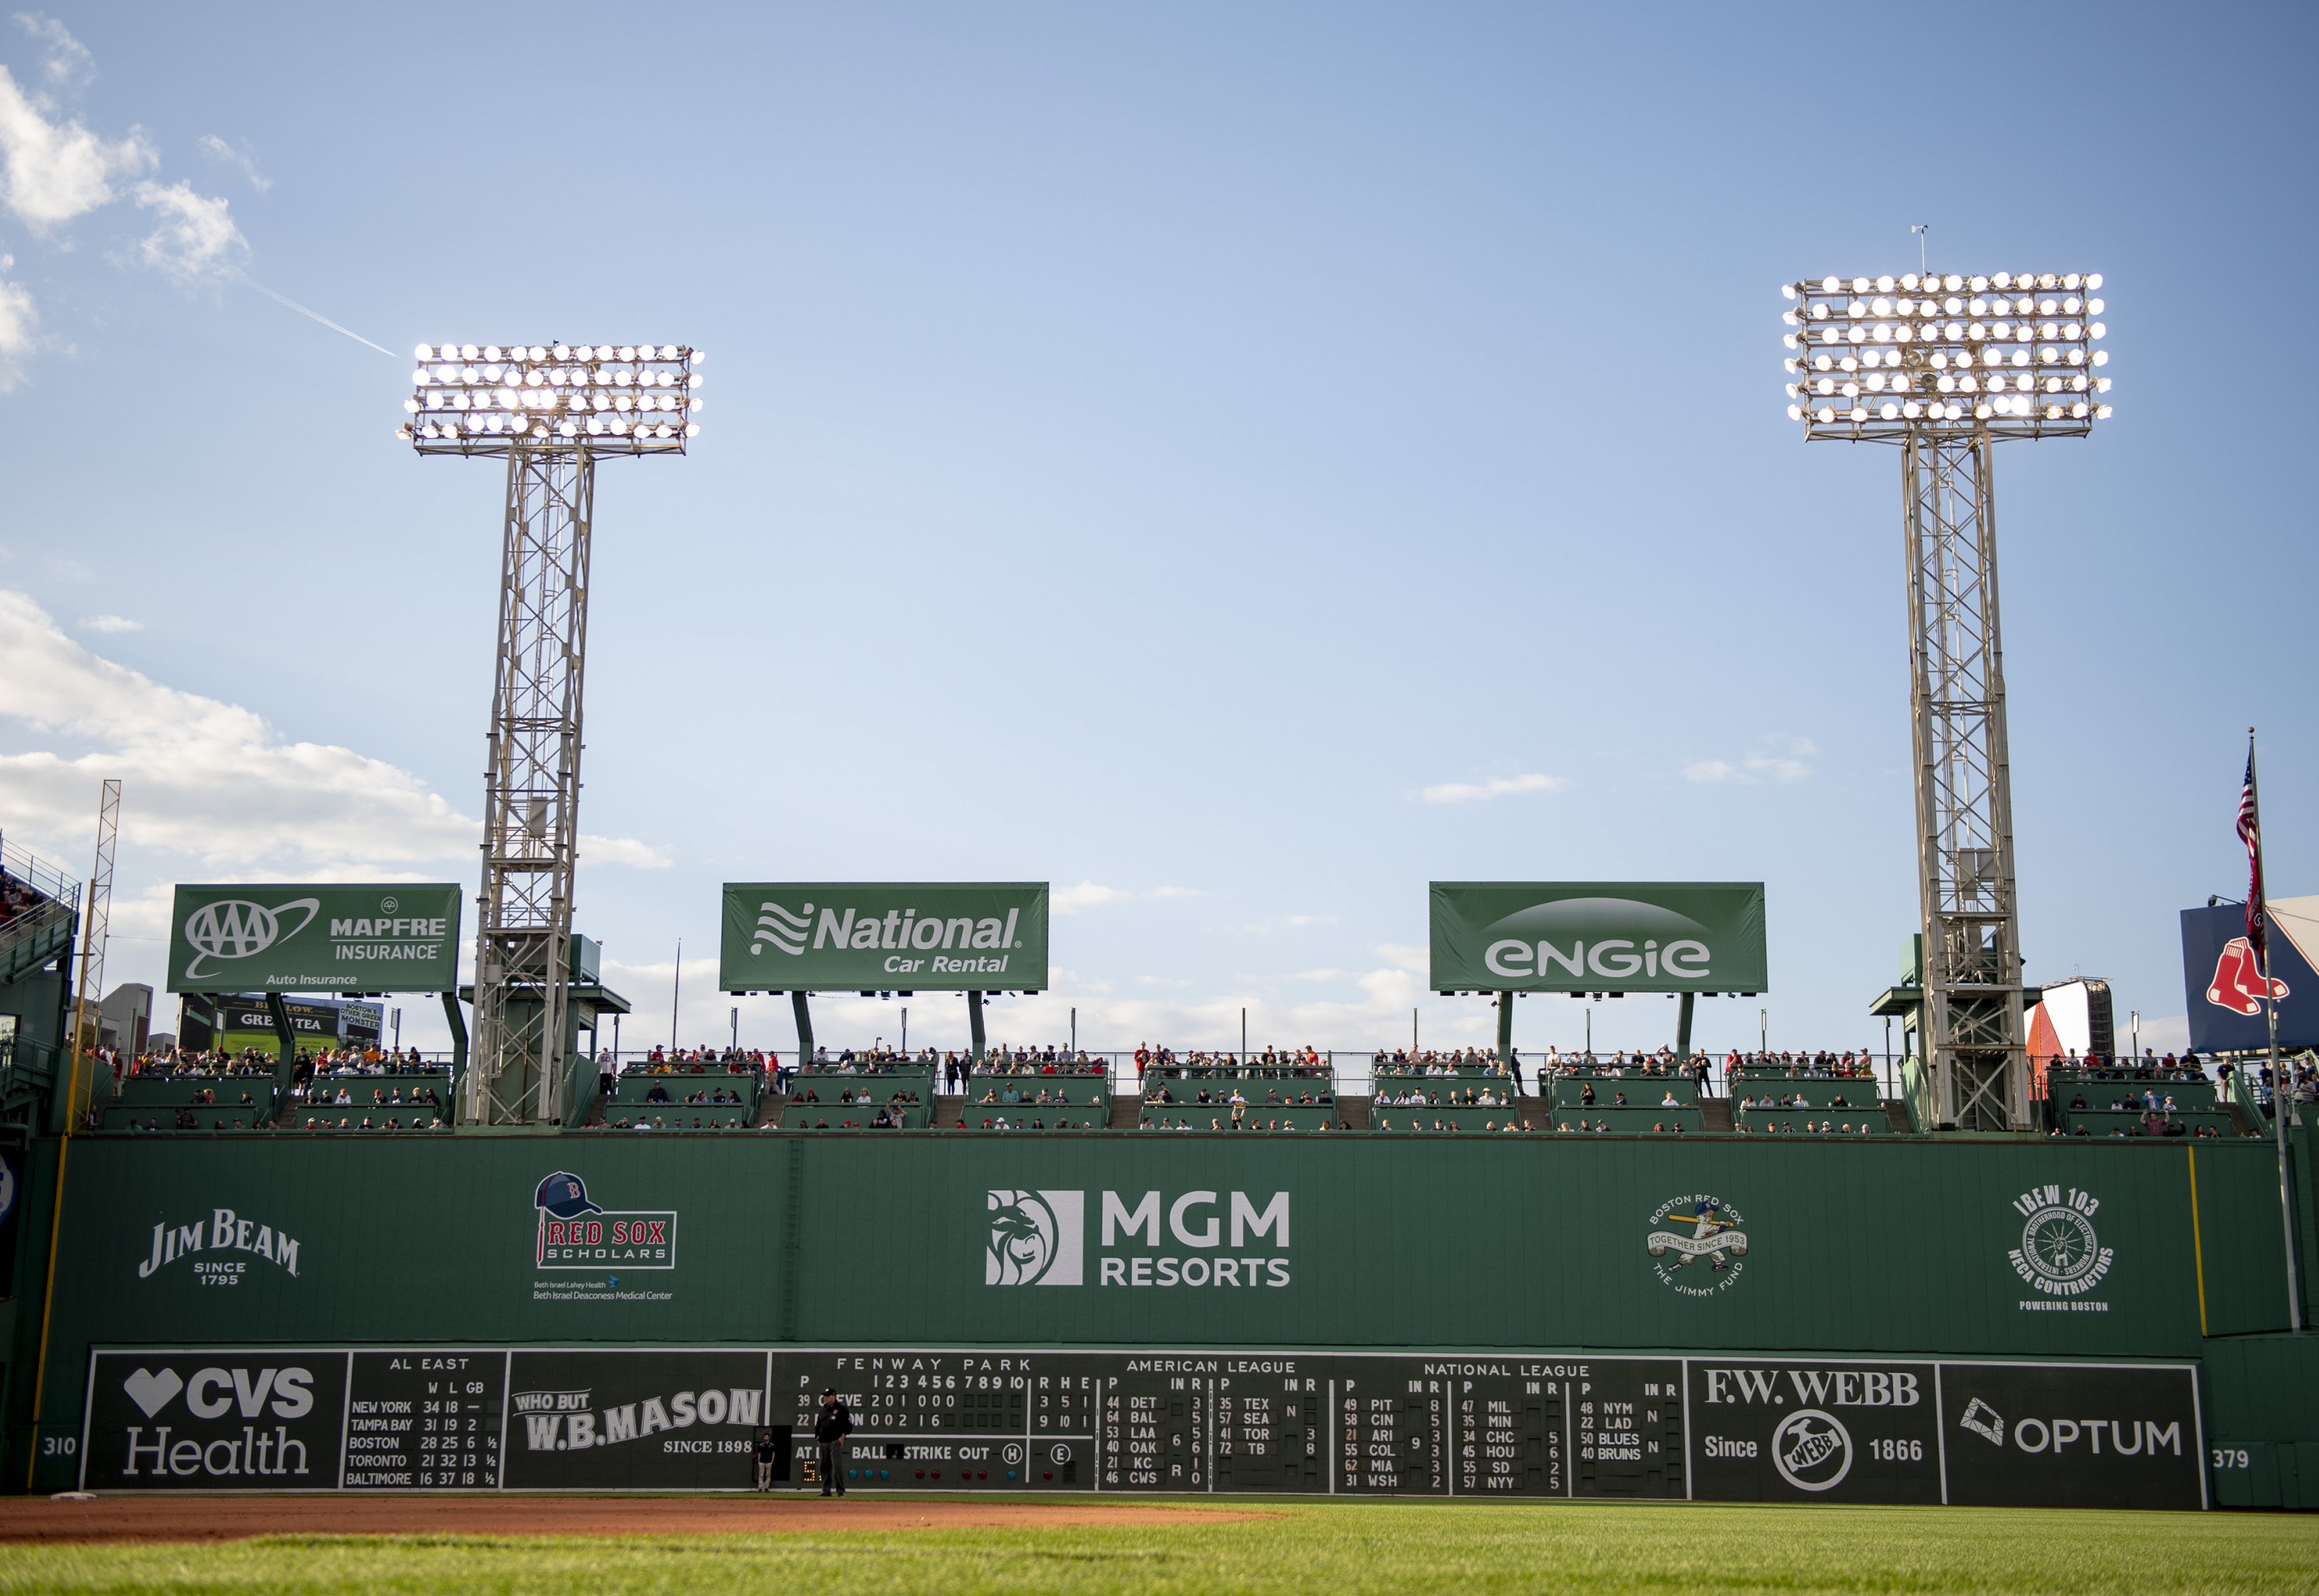 Ranking The Large Fenway Park Advertisements of The 21st Century